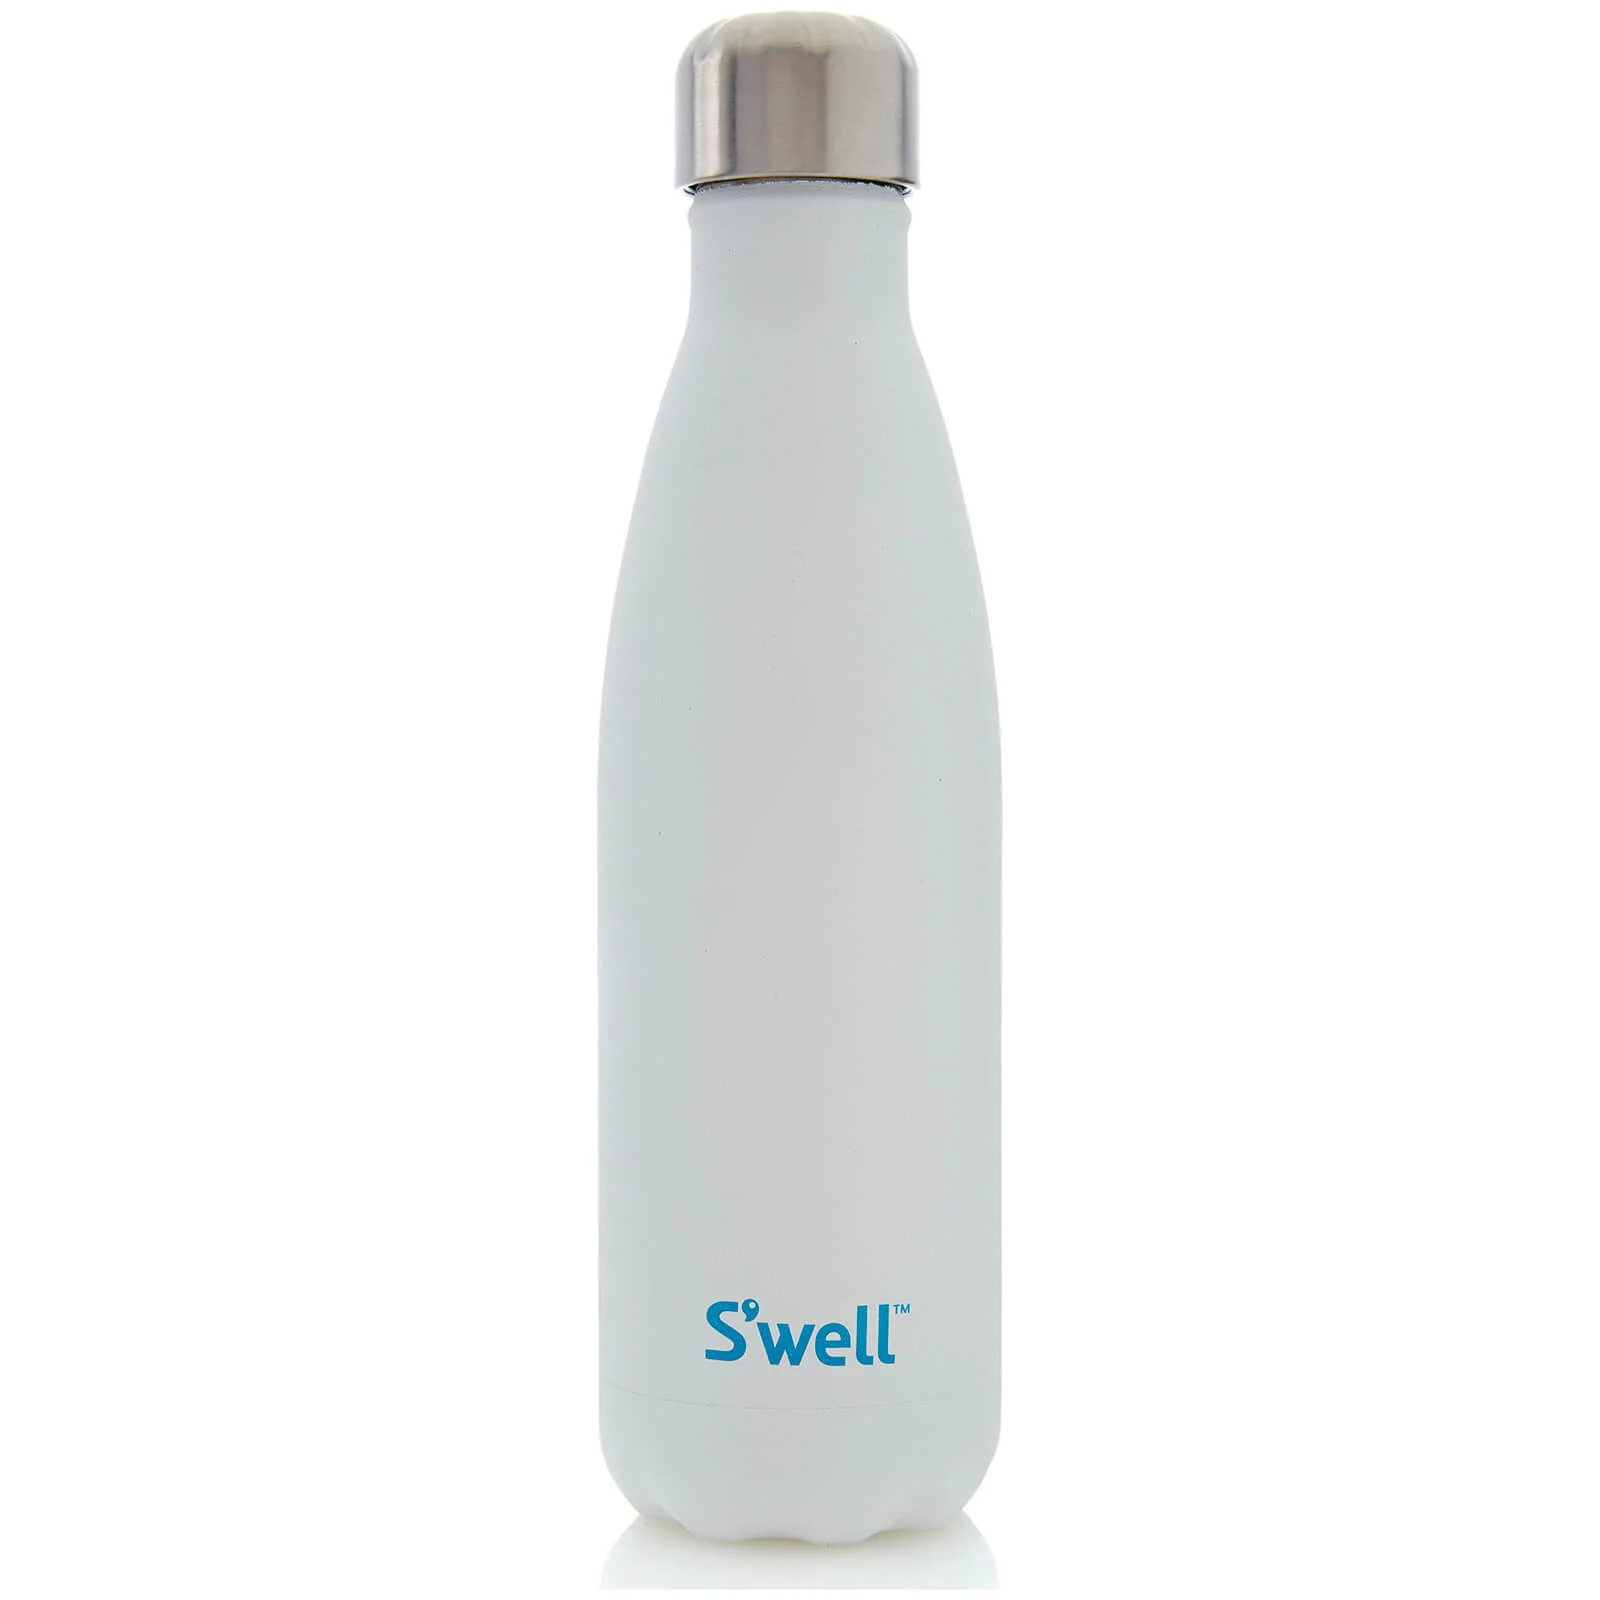 S'well The Moonstone Water Bottle 500ml Image 1